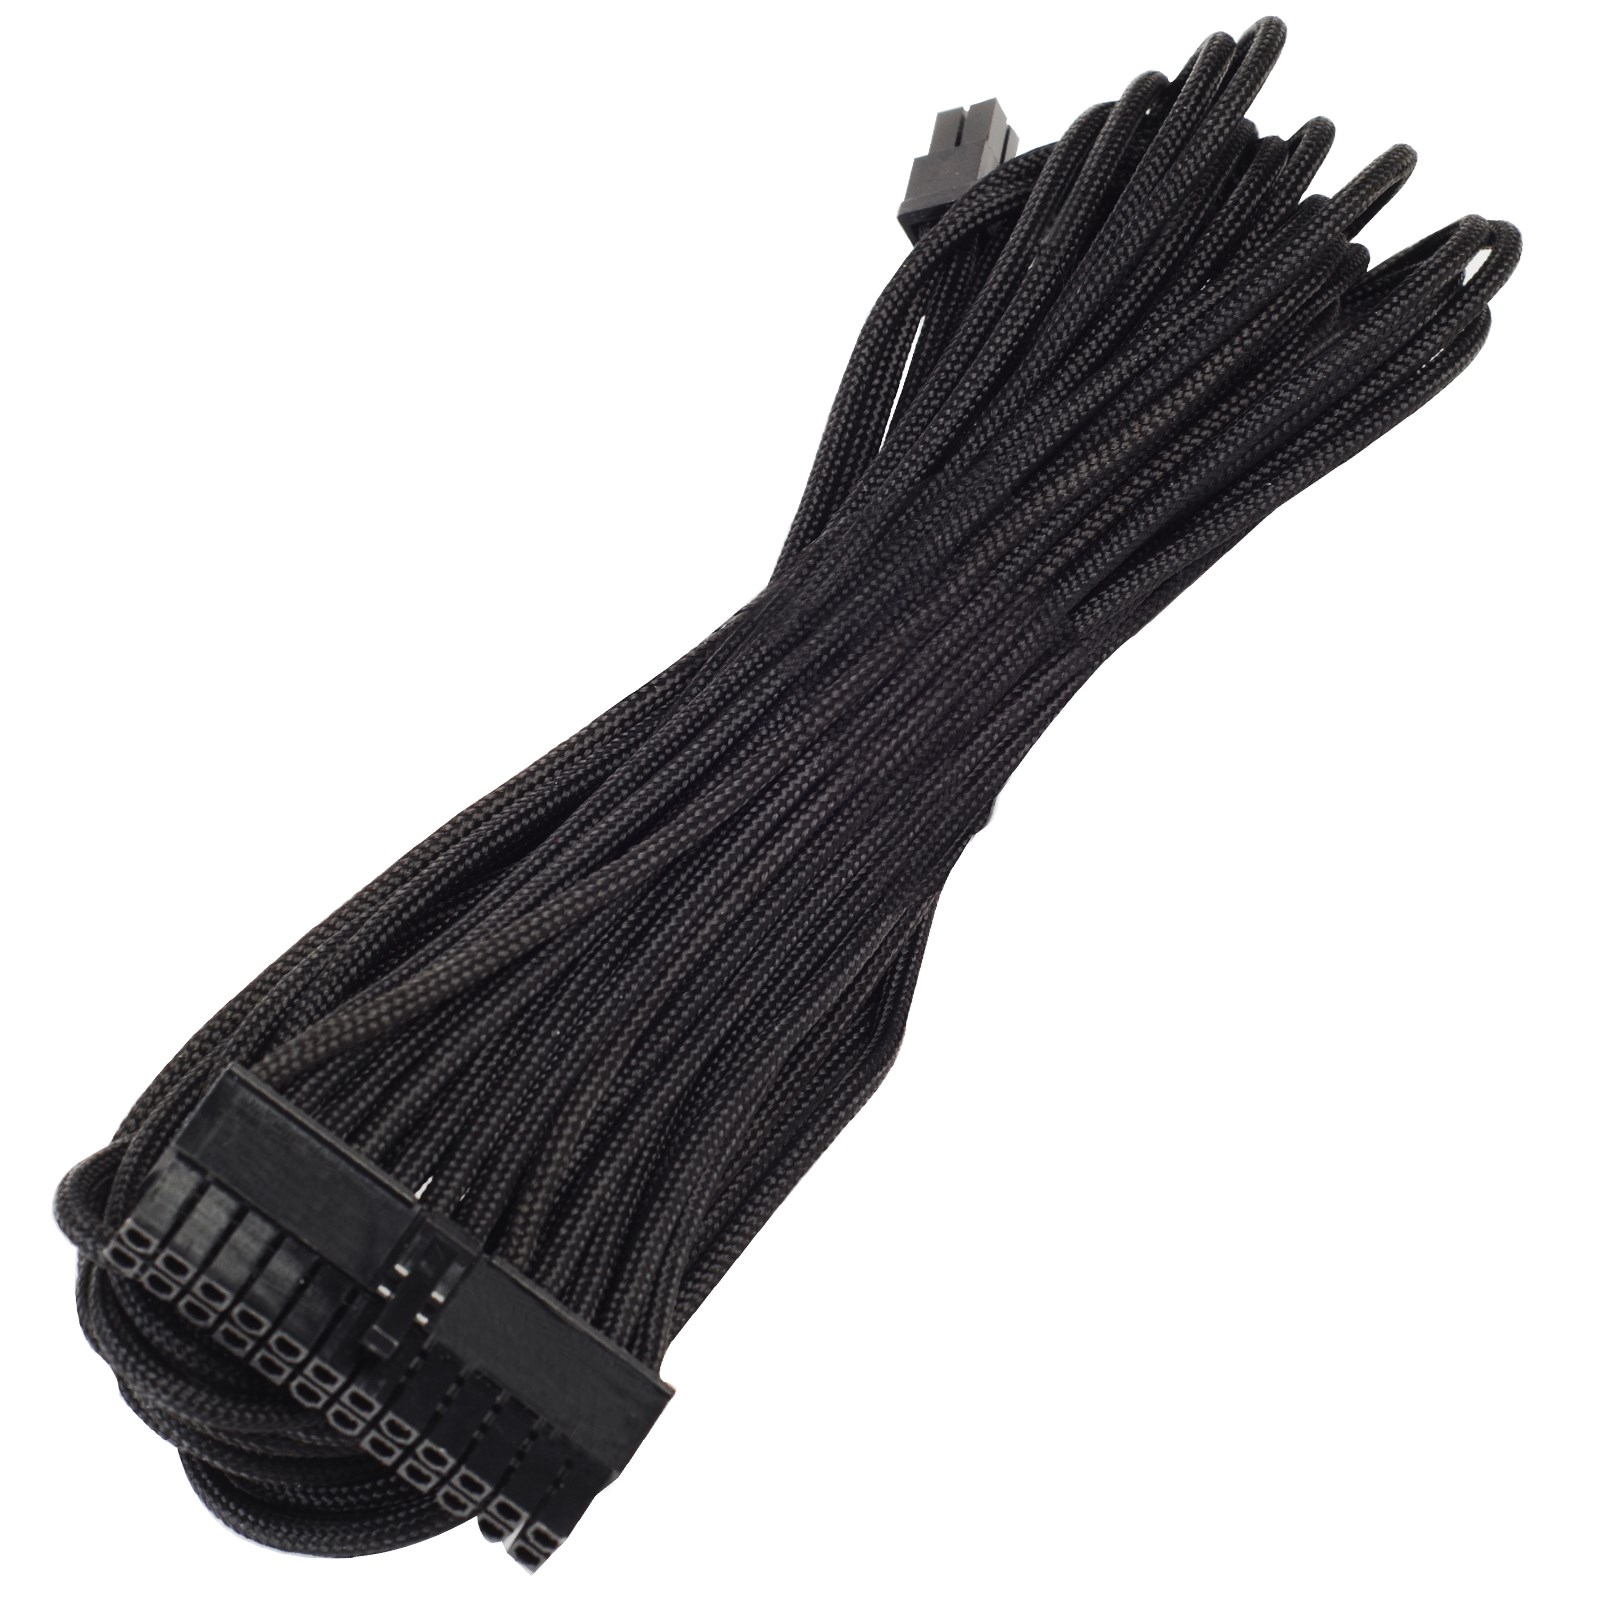 Photos - Cable (video, audio, USB) SilverStone PP06B-MB55 550mm 24-pin ATX Sleeved Cable in Black SST-PP06B-M 